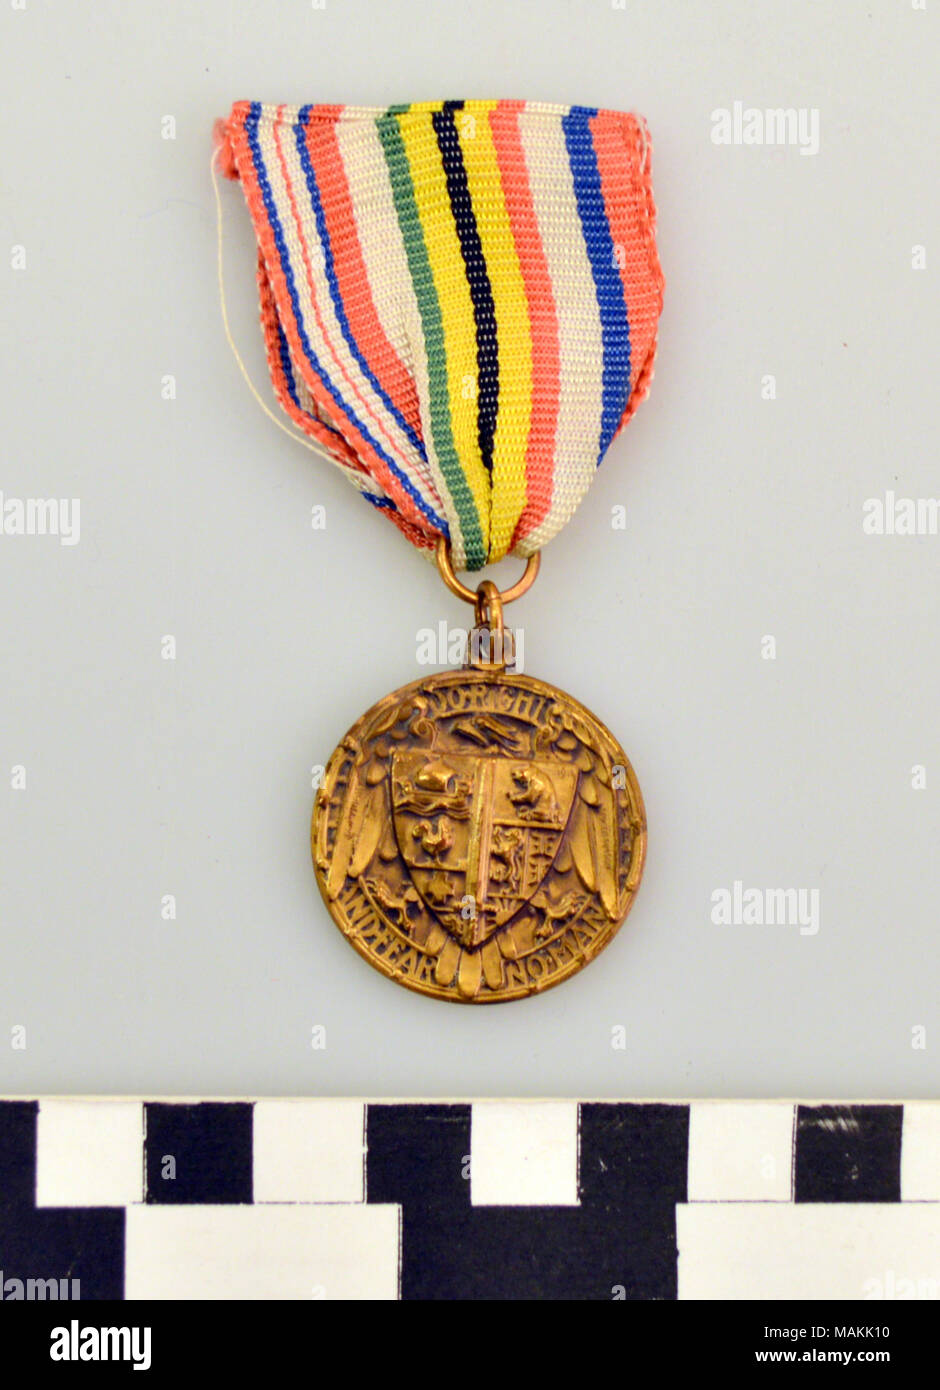 American War Medal, Issued by the American Fund for French Wounded commemorating the entrance of the United States into World War I. Medal has attached a multicolored, striped ribbon attached. Title: American War Medal, Issued by the American Fund for French Wounded  . circa 1914. Whitehead and Hoag Company, Newark, NJ Stock Photo